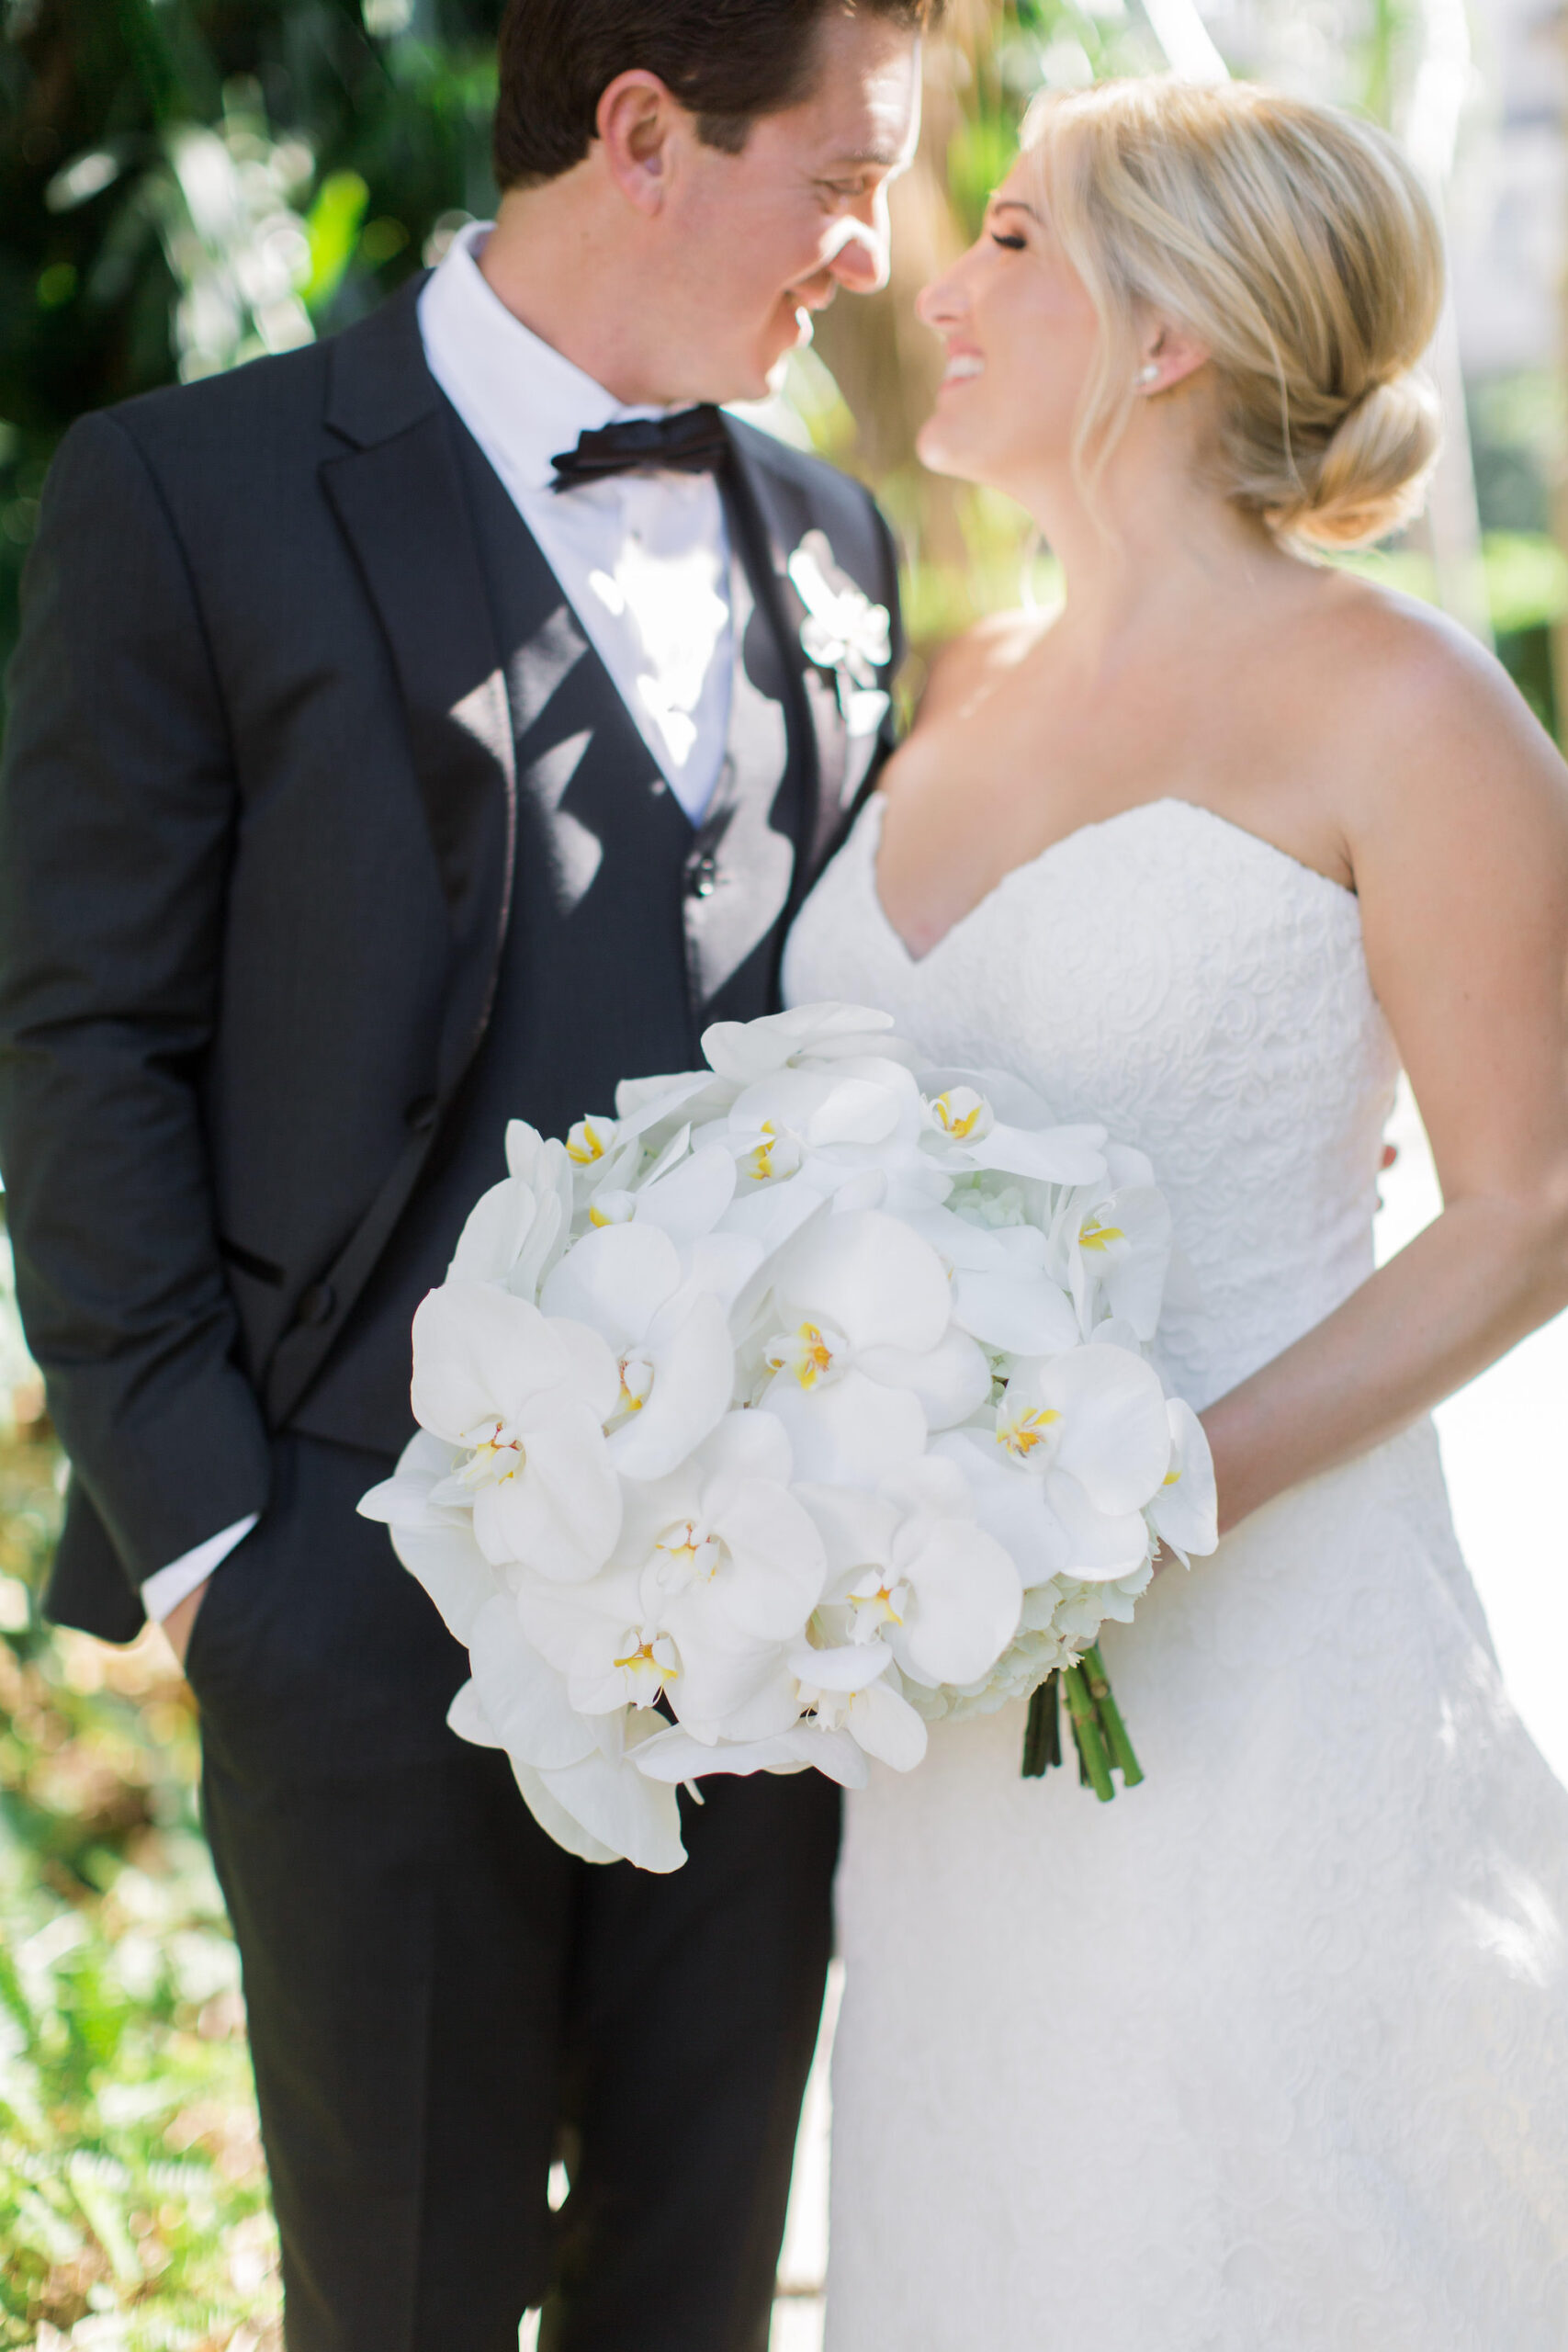 Timeless Classic Wedding, Bride and Groom First Look Wedding Portrait, White Orchid Floral Bouquet | Tampa Bay Wedding Florist Bruce Wayne Florals